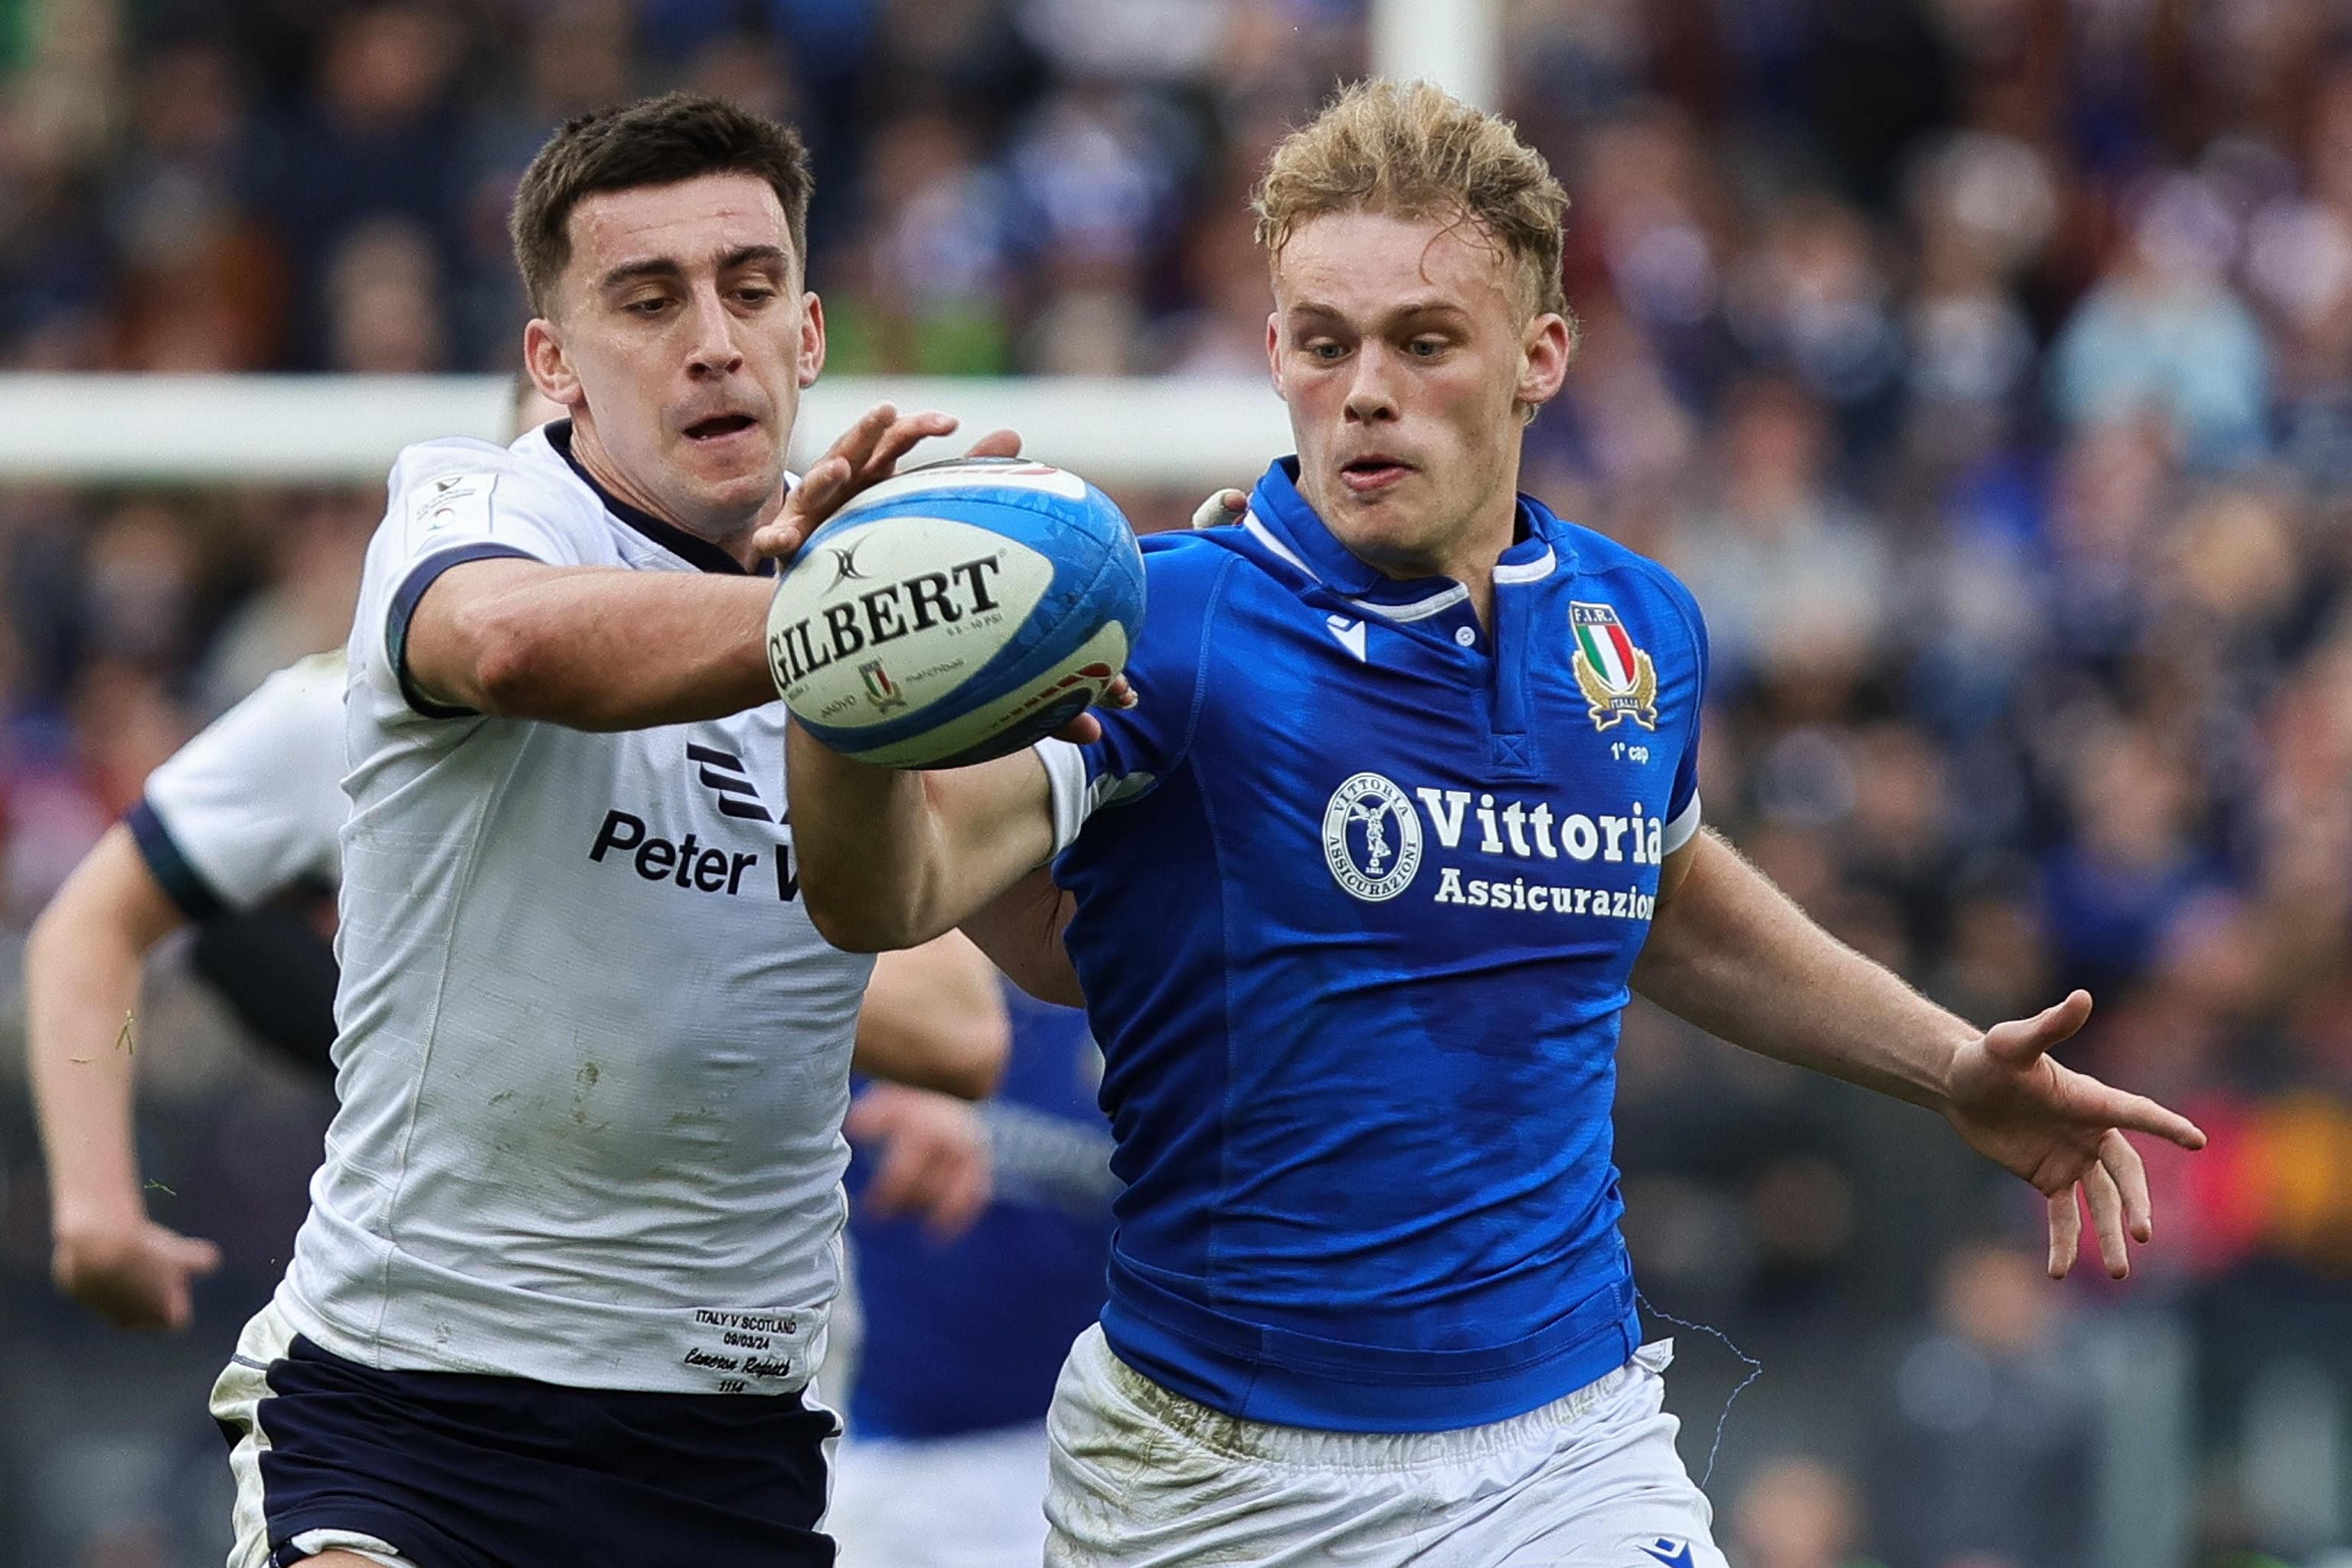 Italy’s Six Nations win over Scotland could not be sweeter for debutant Louis Lynagh